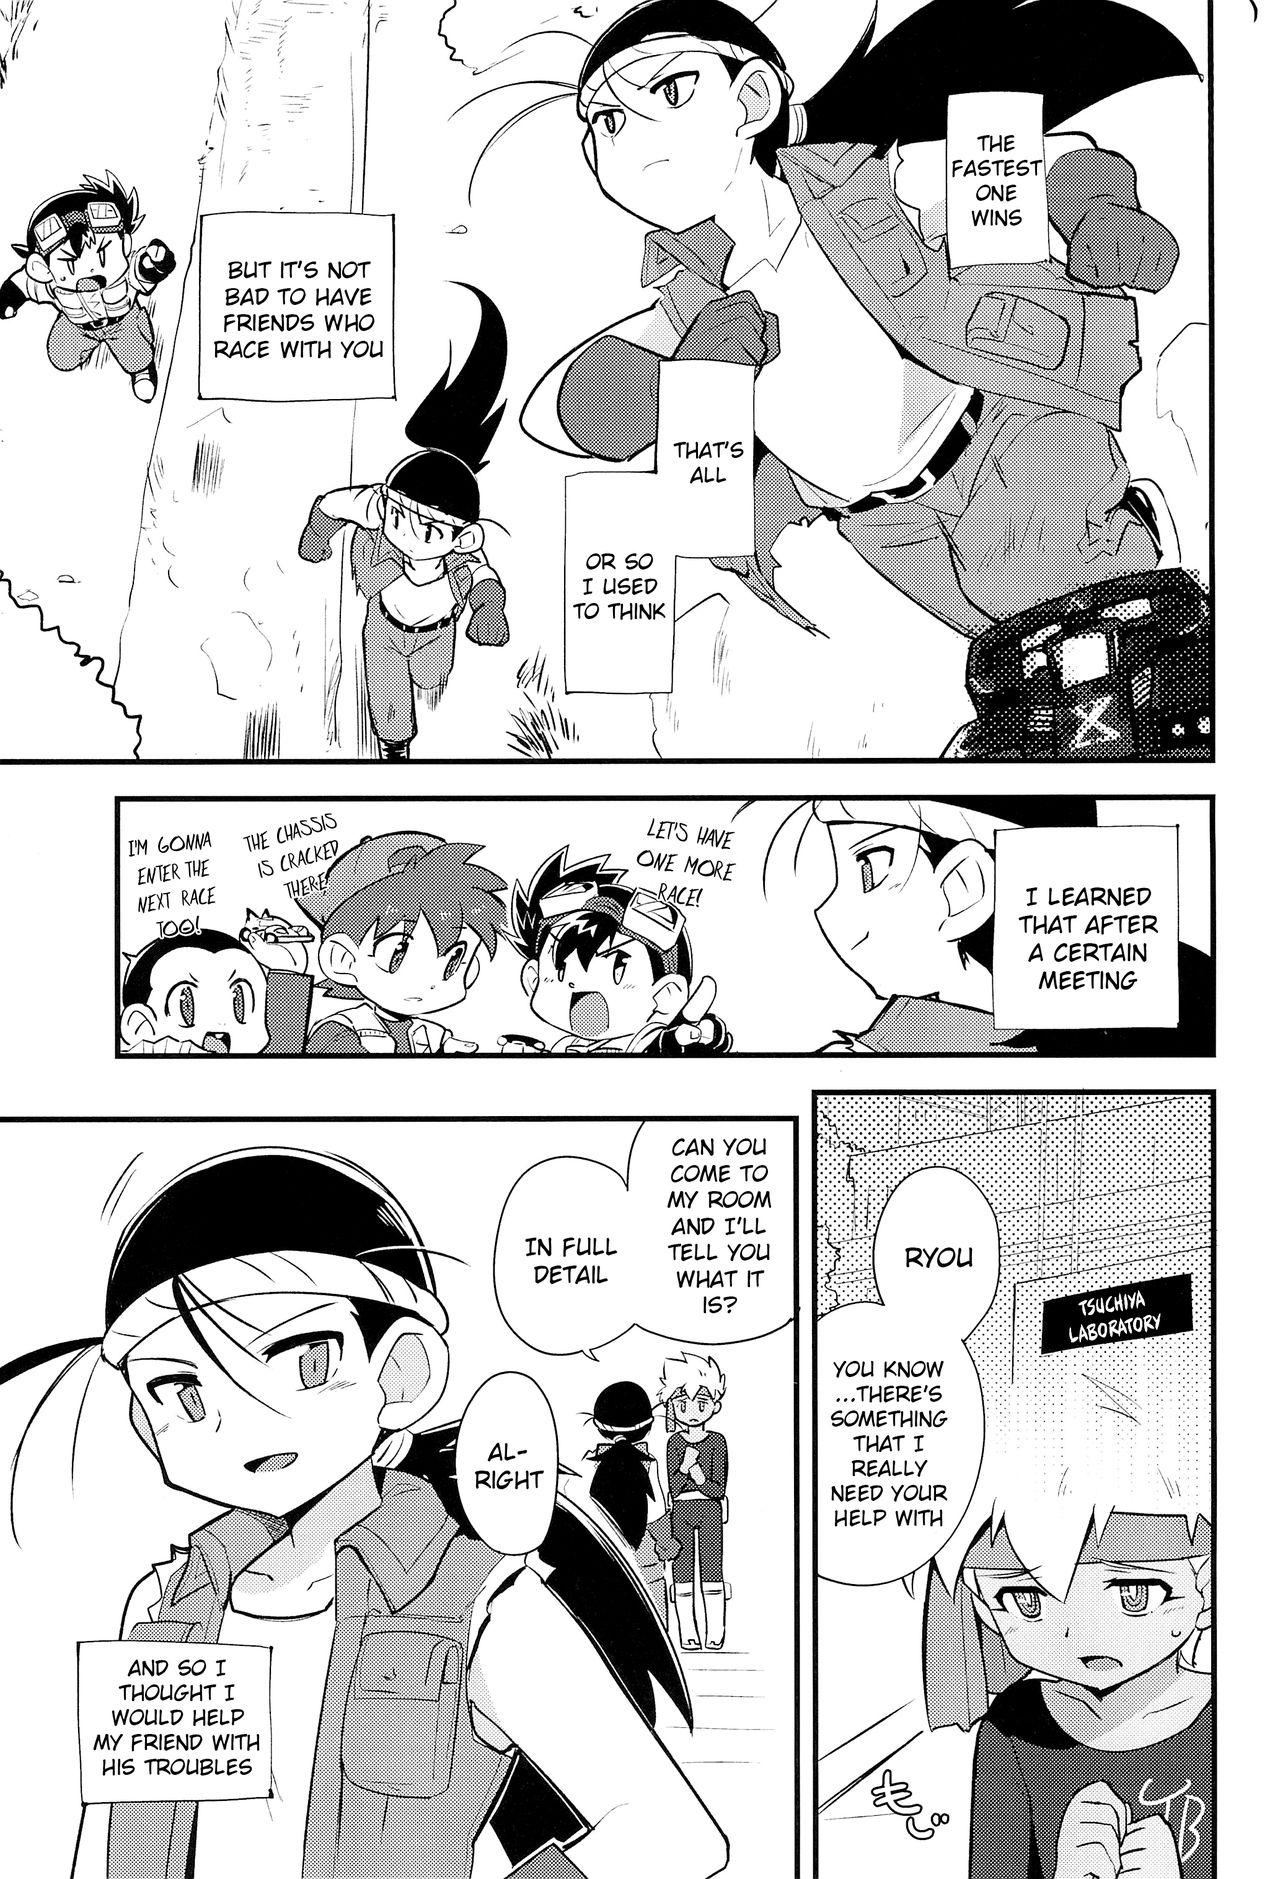 Caught Try Shichau? | Wanna Try It? - Bakusou kyoudai lets and go Underwear - Page 2